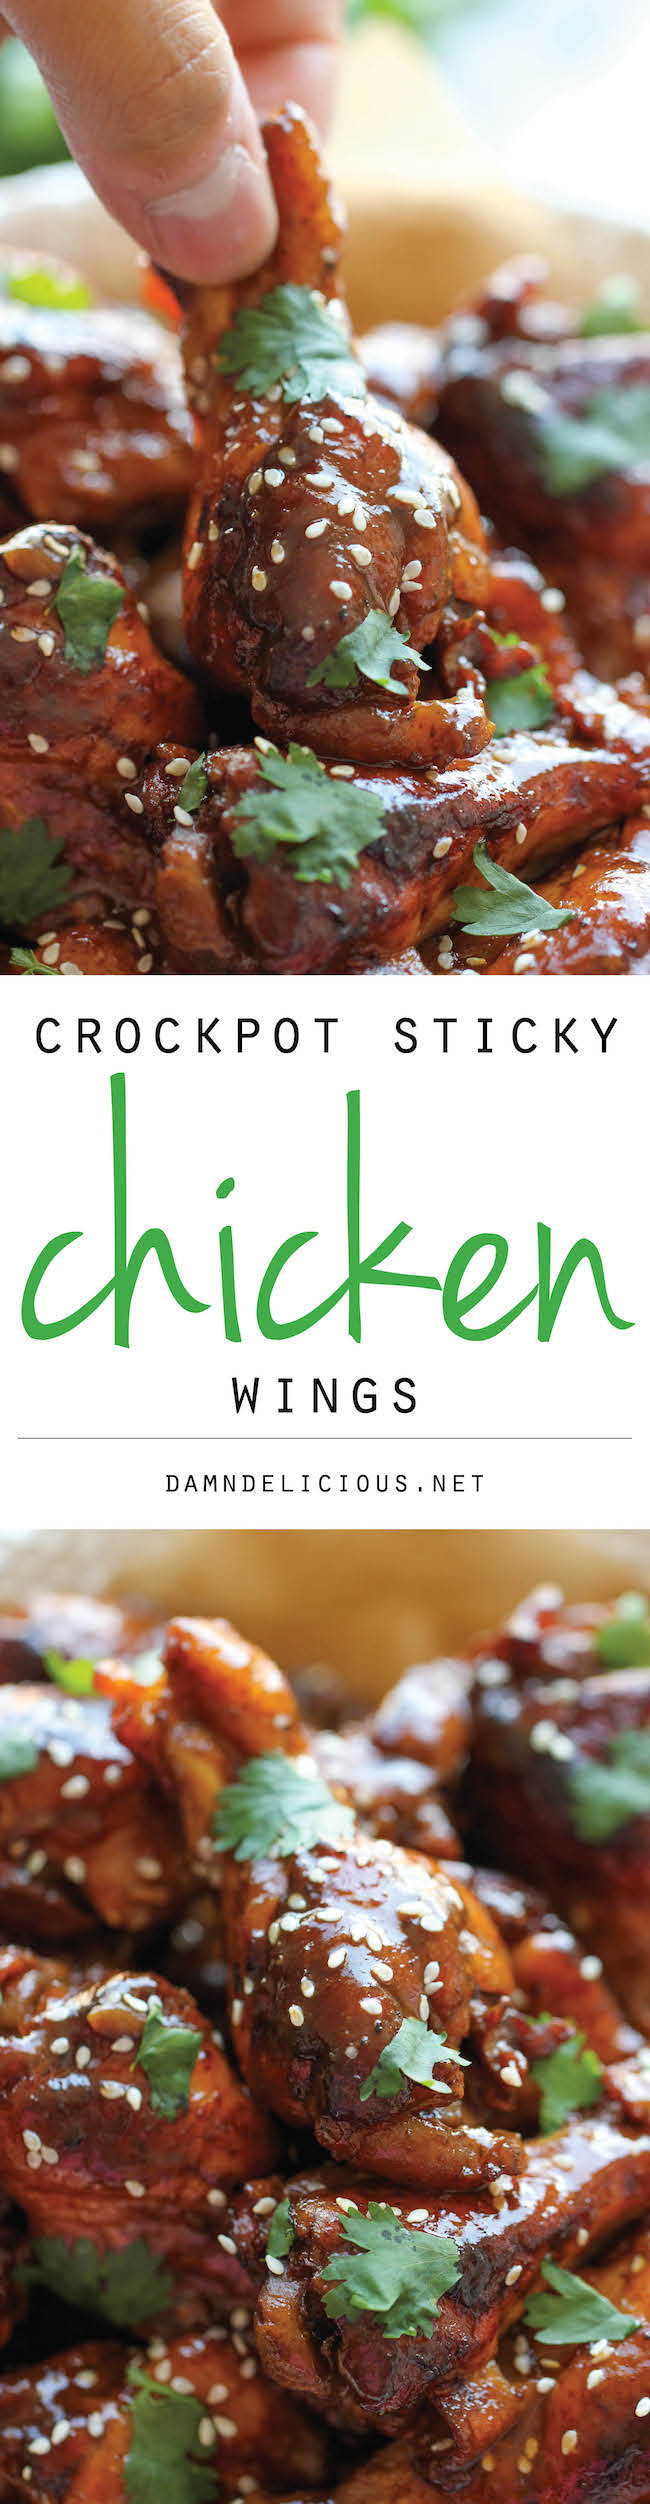 Slow Cooker Sticky Chicken Wings
 Slow Cooker Sticky Chicken Wings by Damn Delicious